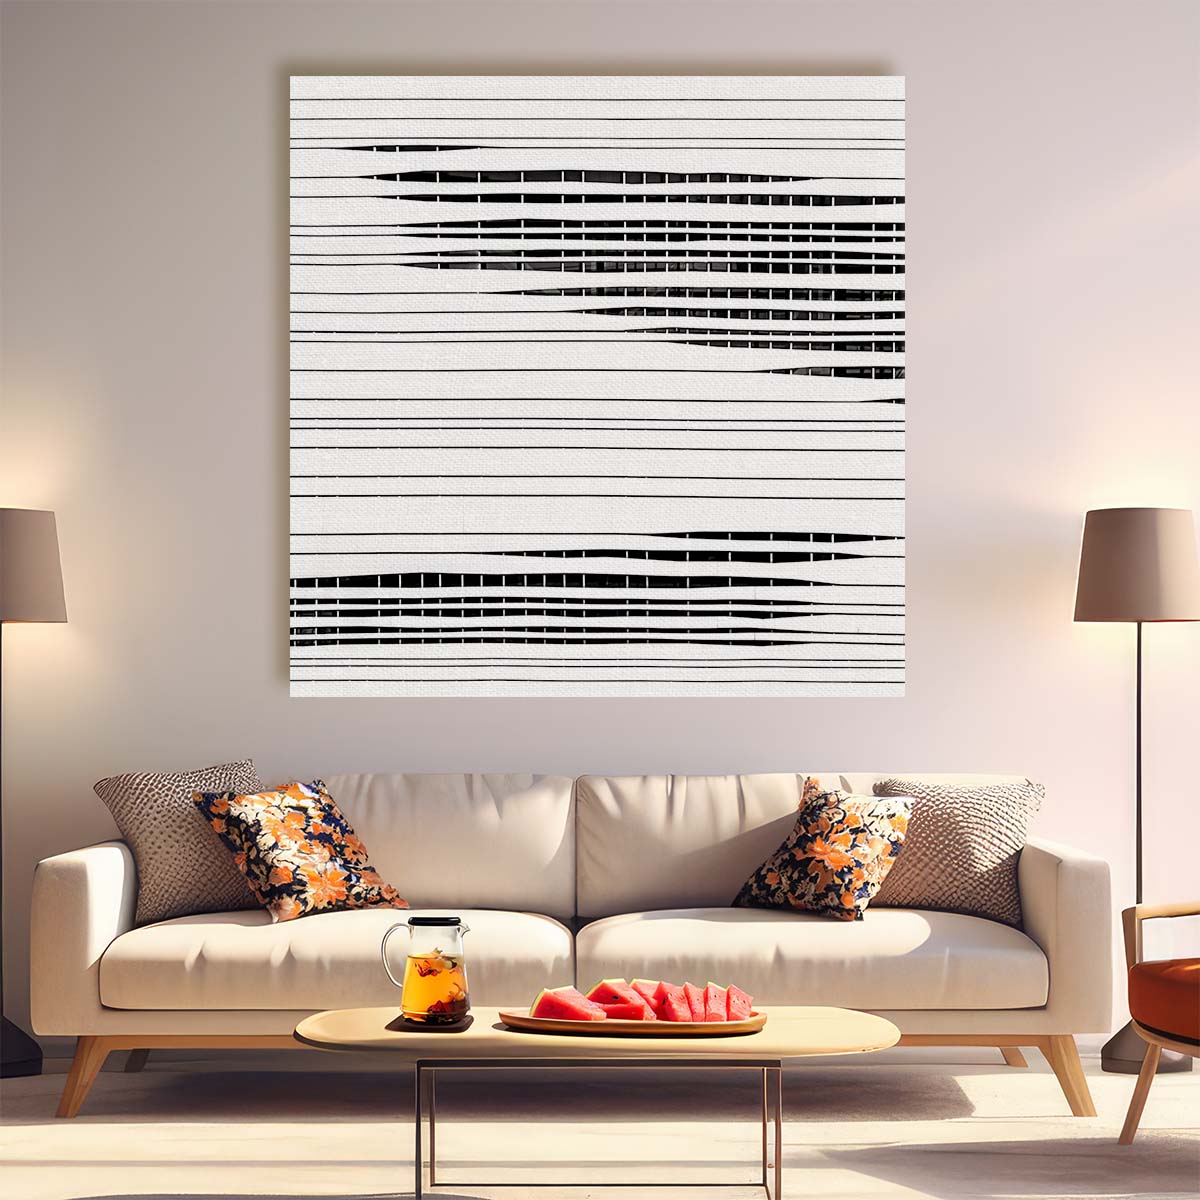 Contemporary Monochrome Geometric Lines & Patterns Architectural Wall Art by Luxuriance Designs. Made in USA.